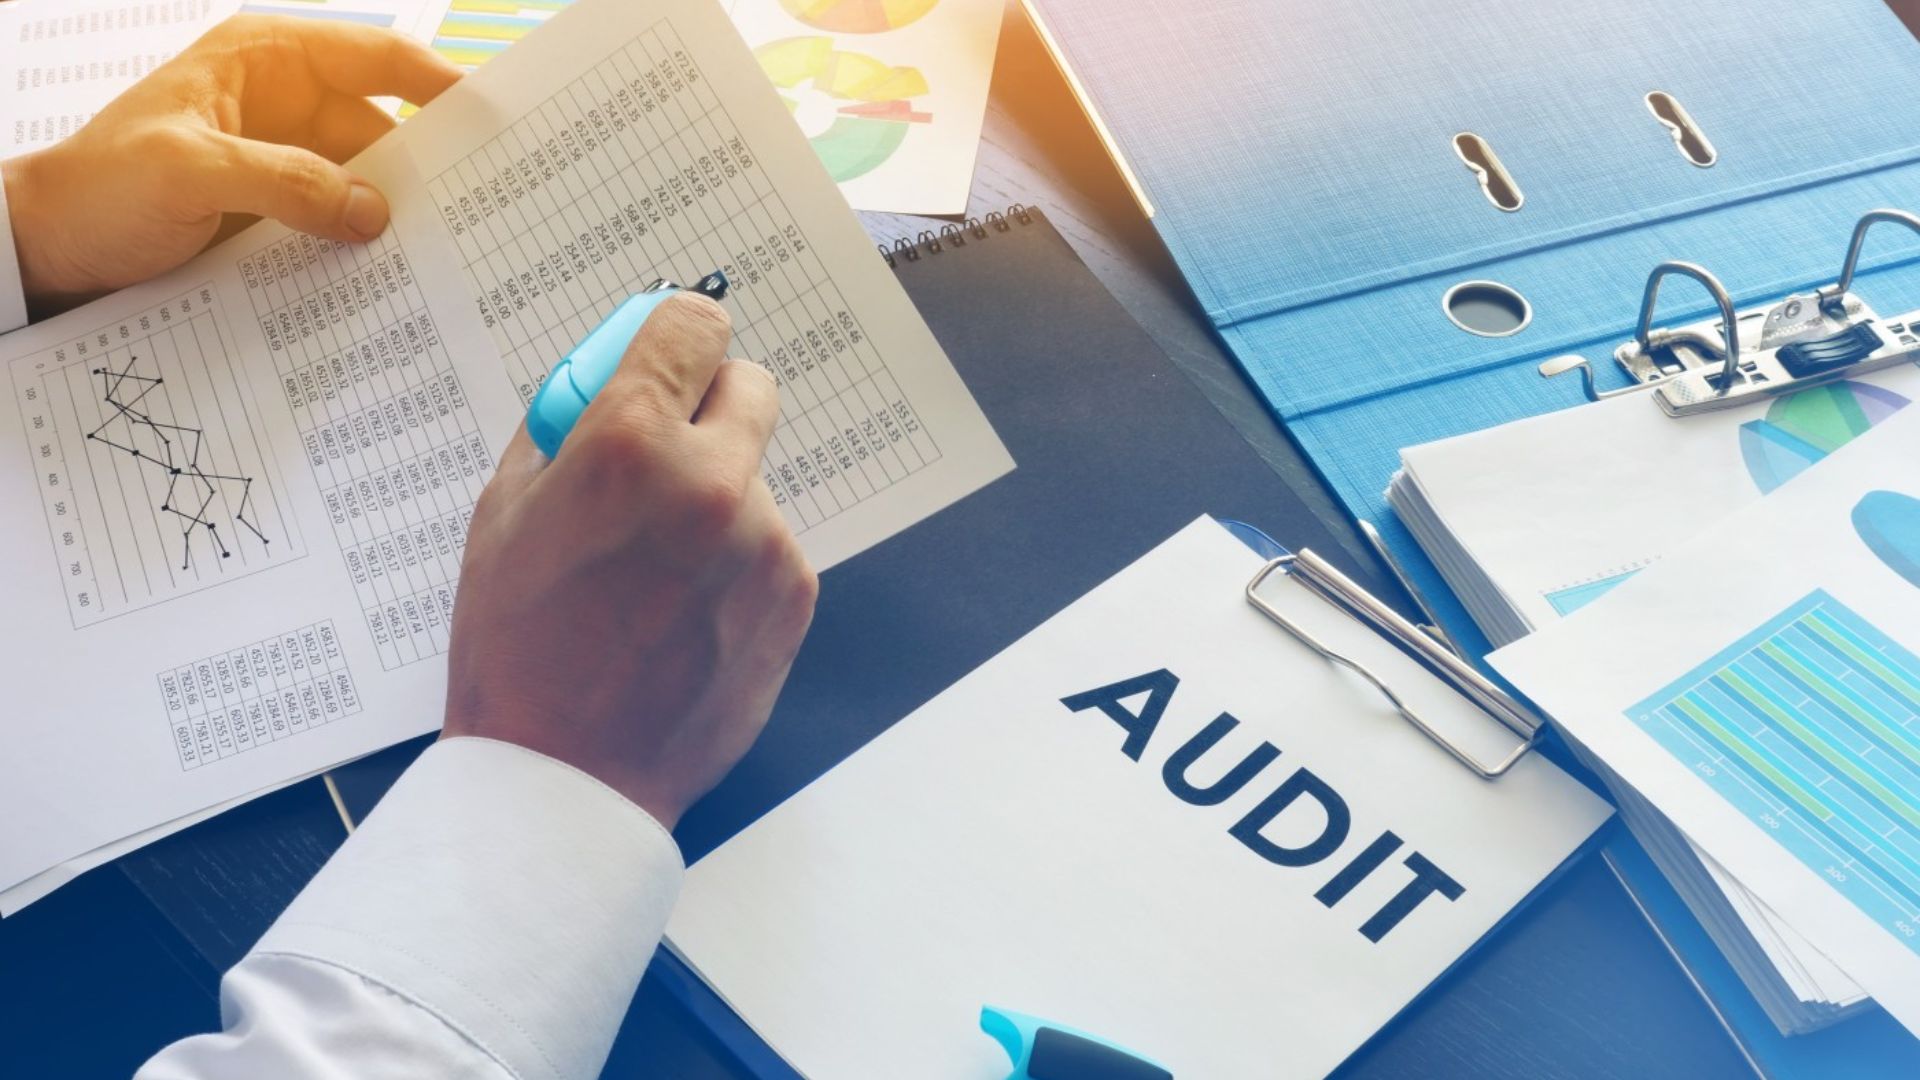 How do approved auditors in Dubai contribute to trust 